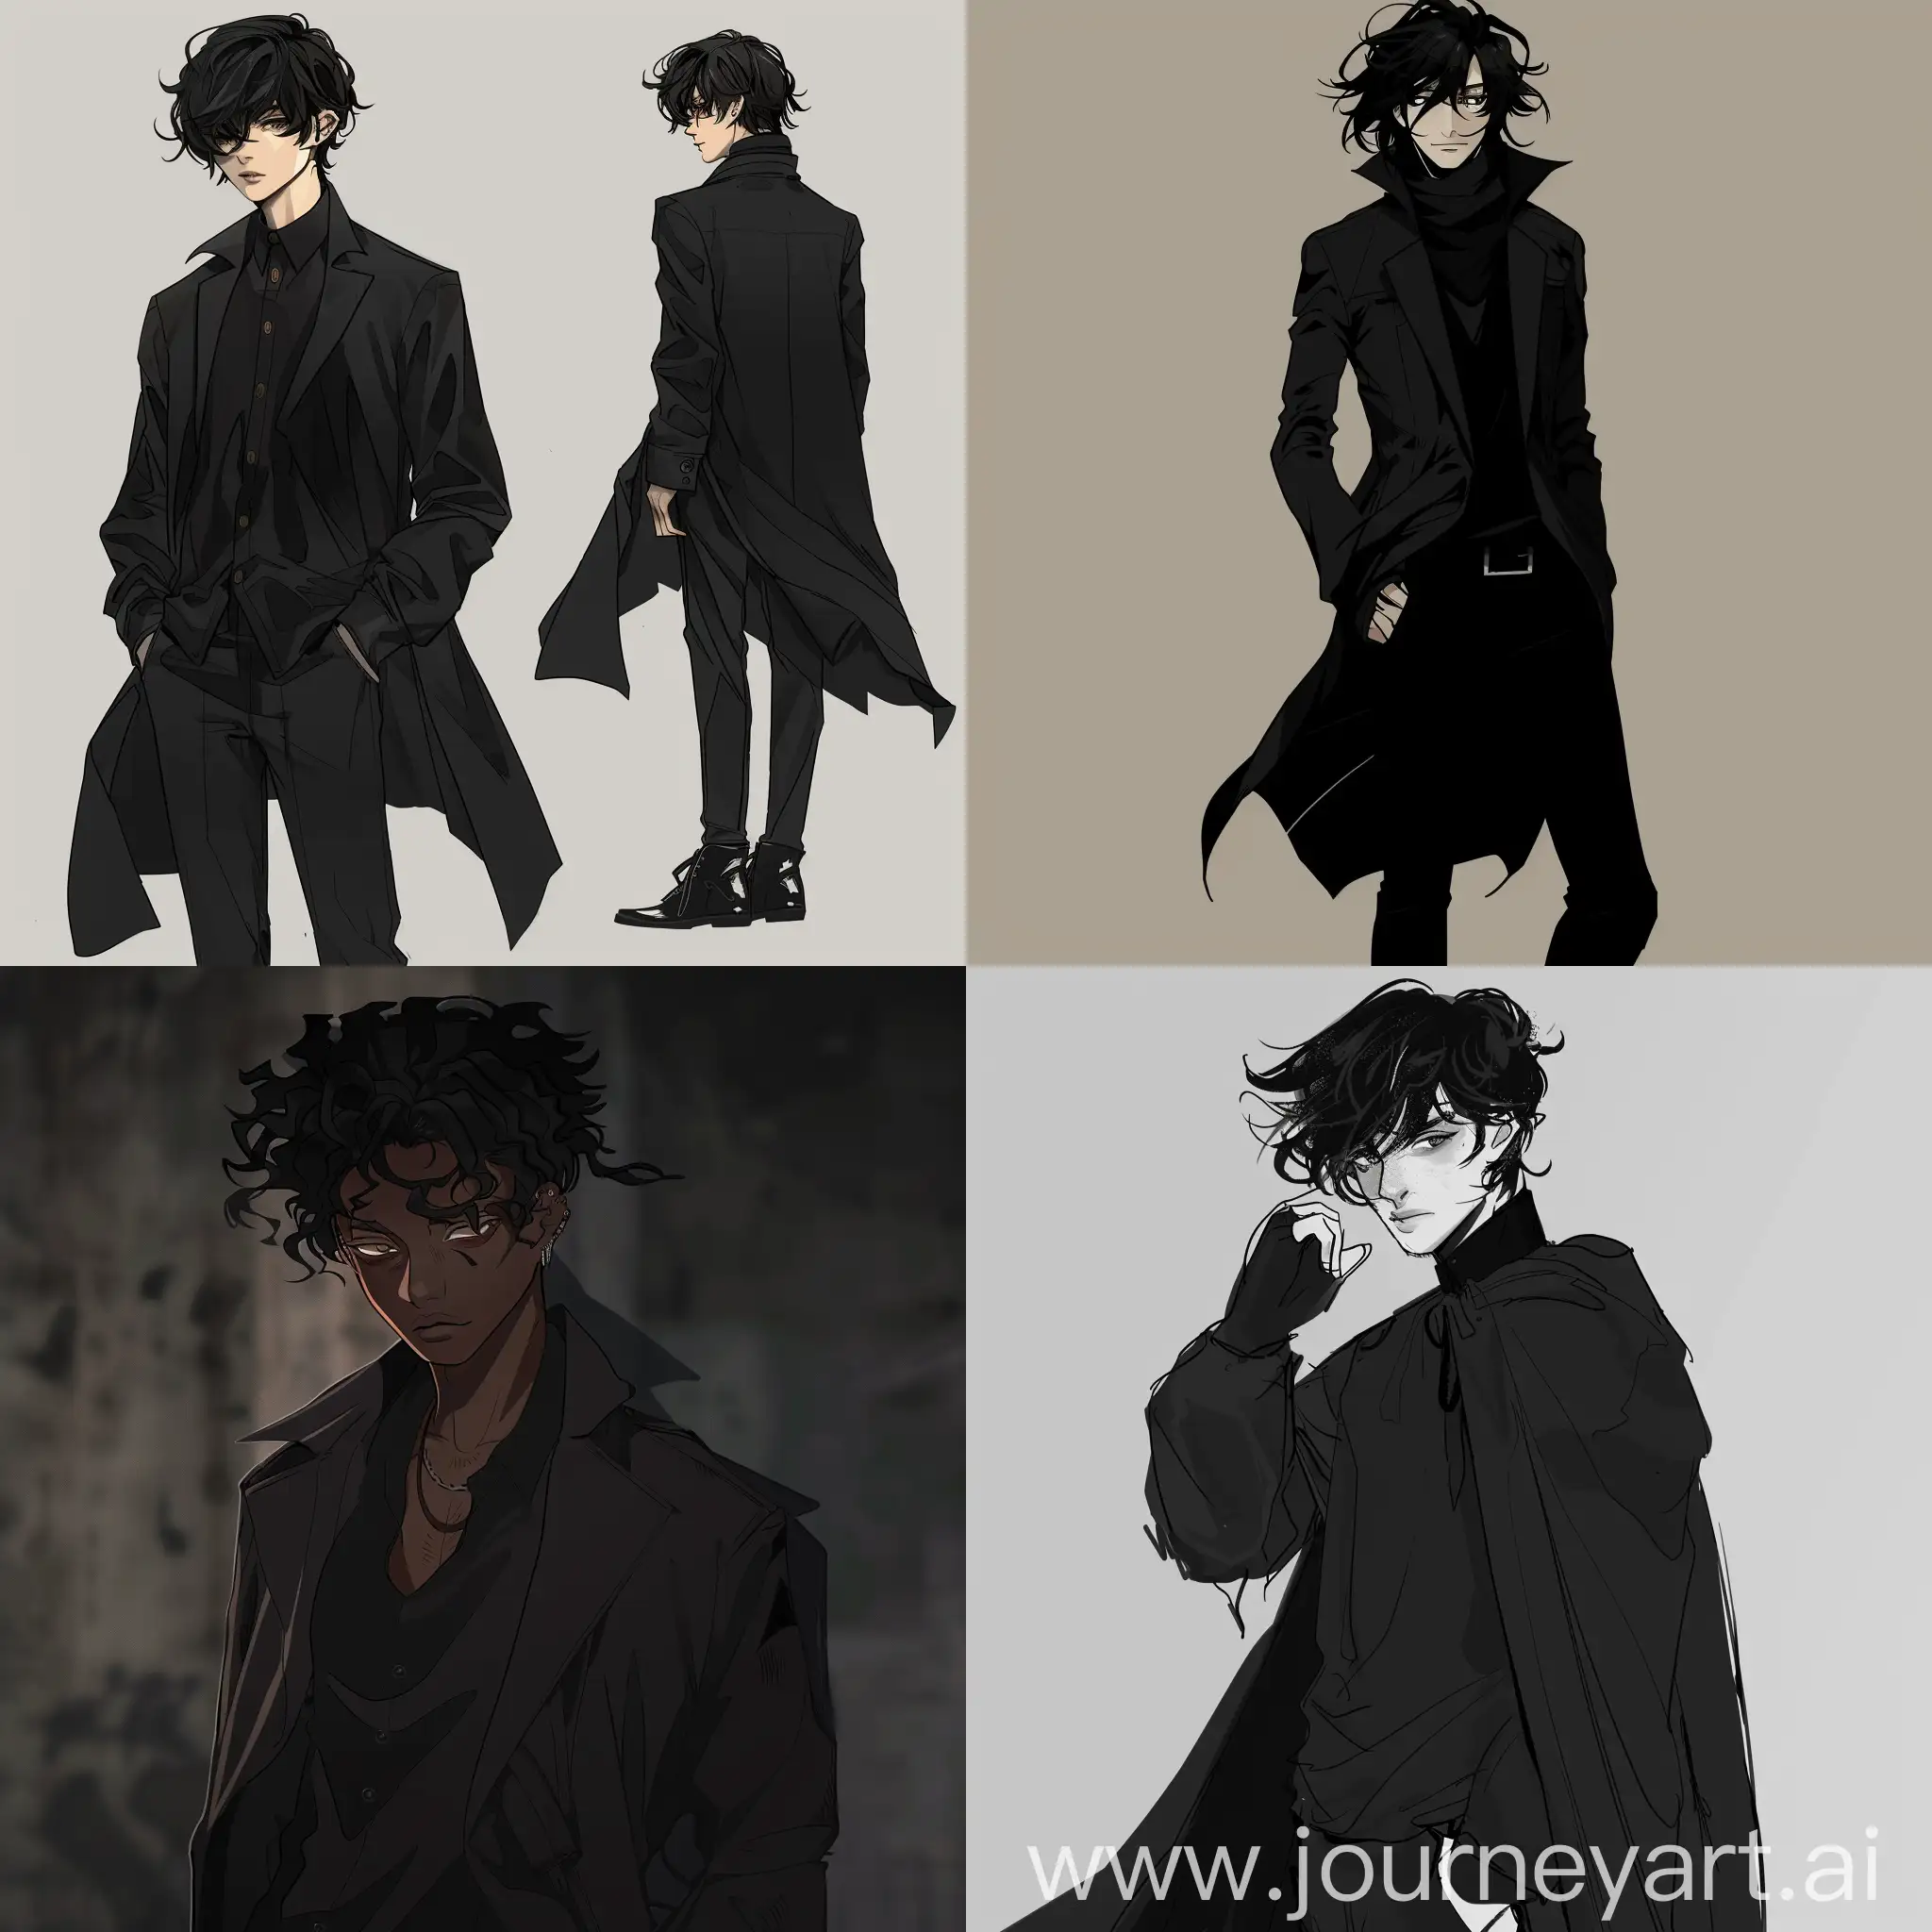 Jan-Adderley-Stylish-Anime-OC-in-Cool-Black-Outfit